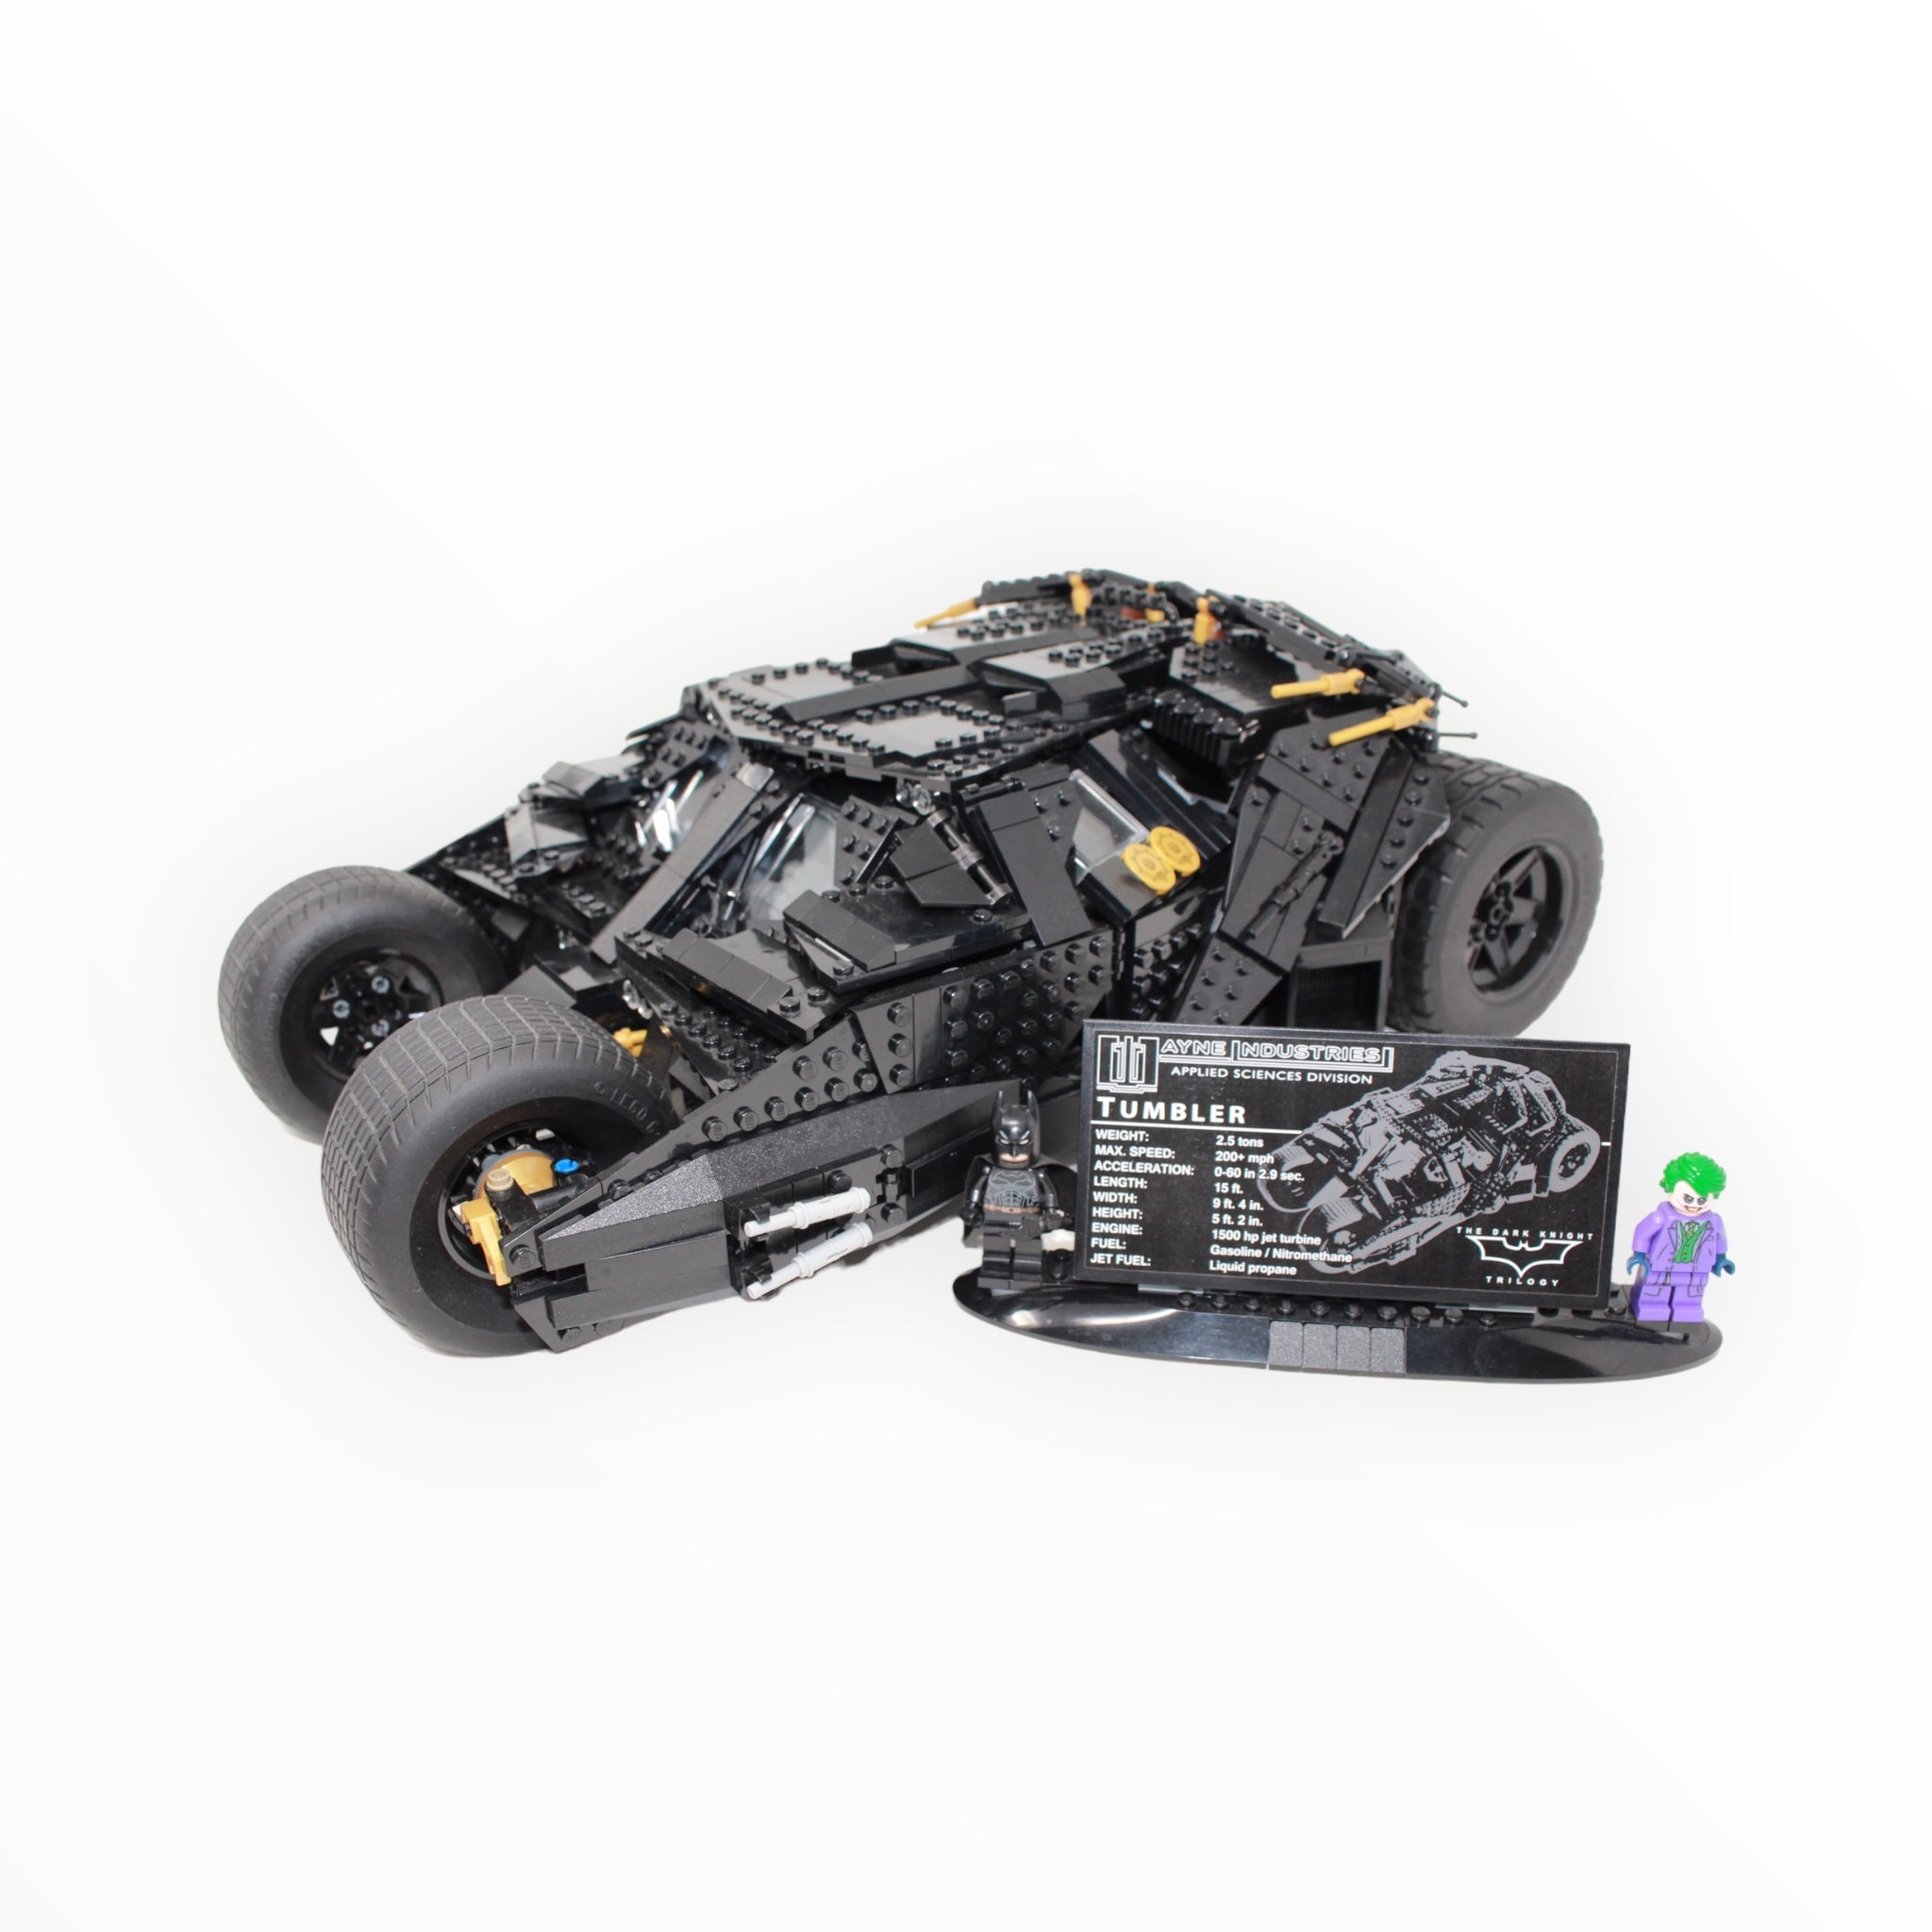 Used Set 76023 DC Super Heroes The Tumbler (2014)